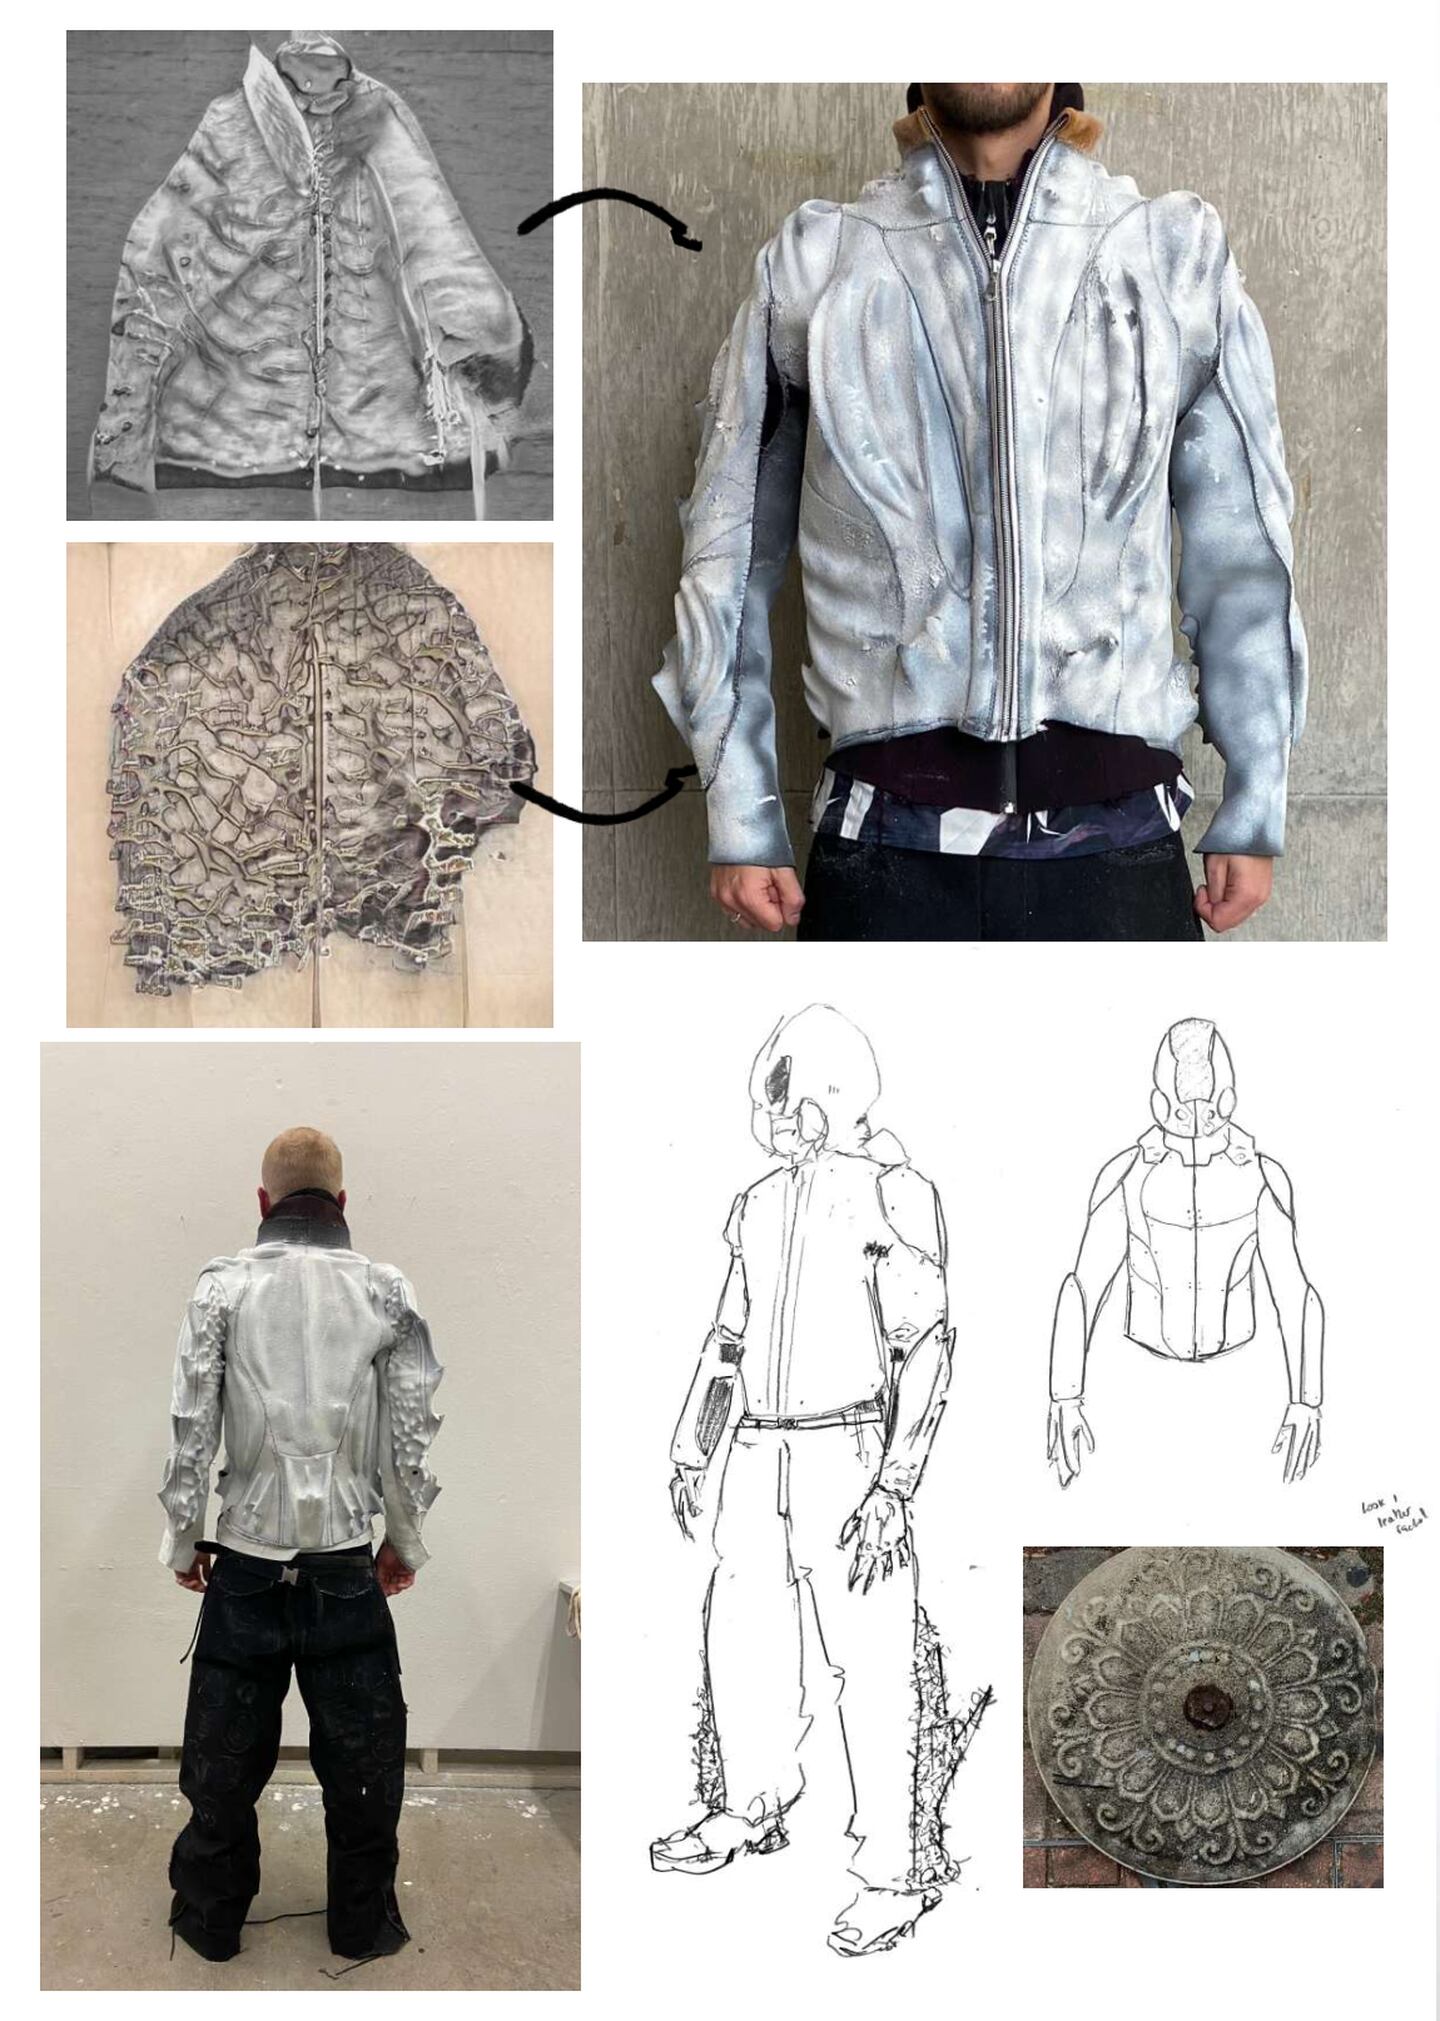 An AI-generated image of what looks like a coat made of melting white wax is positioned next to an image wearing a physical version.